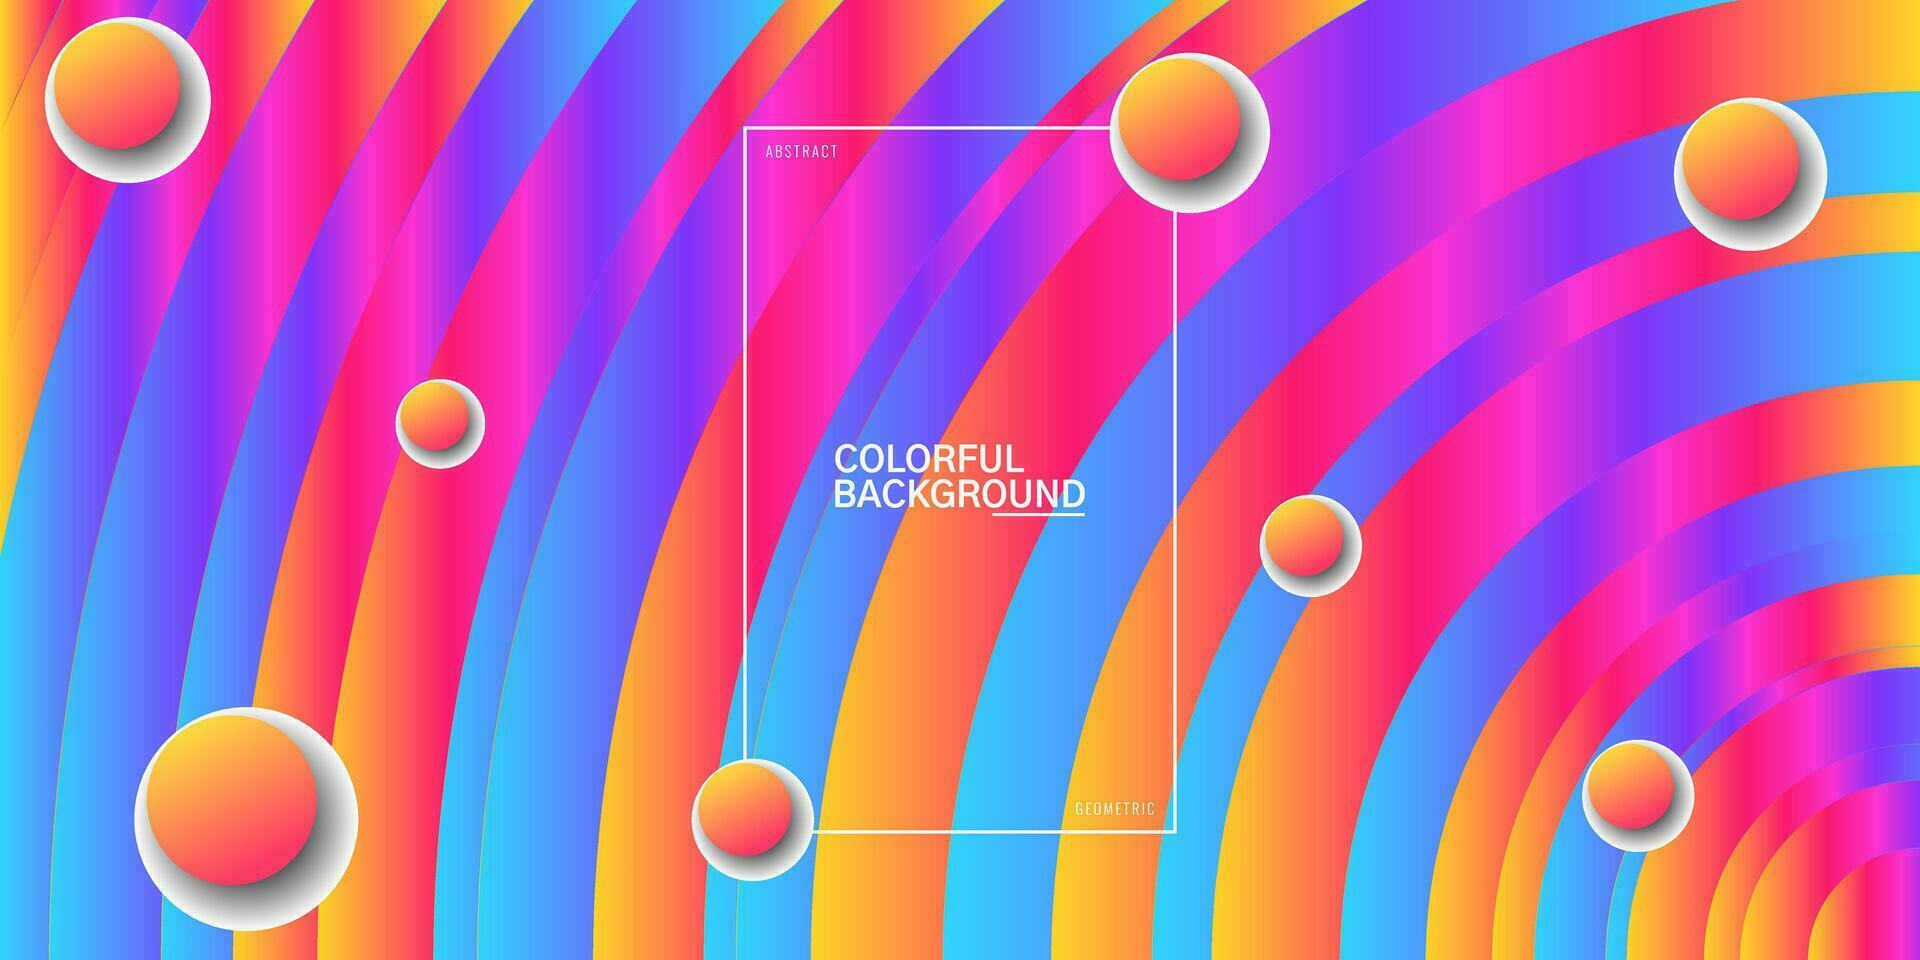 Premium colorful abstract background with geometric gradient modern shapes vector